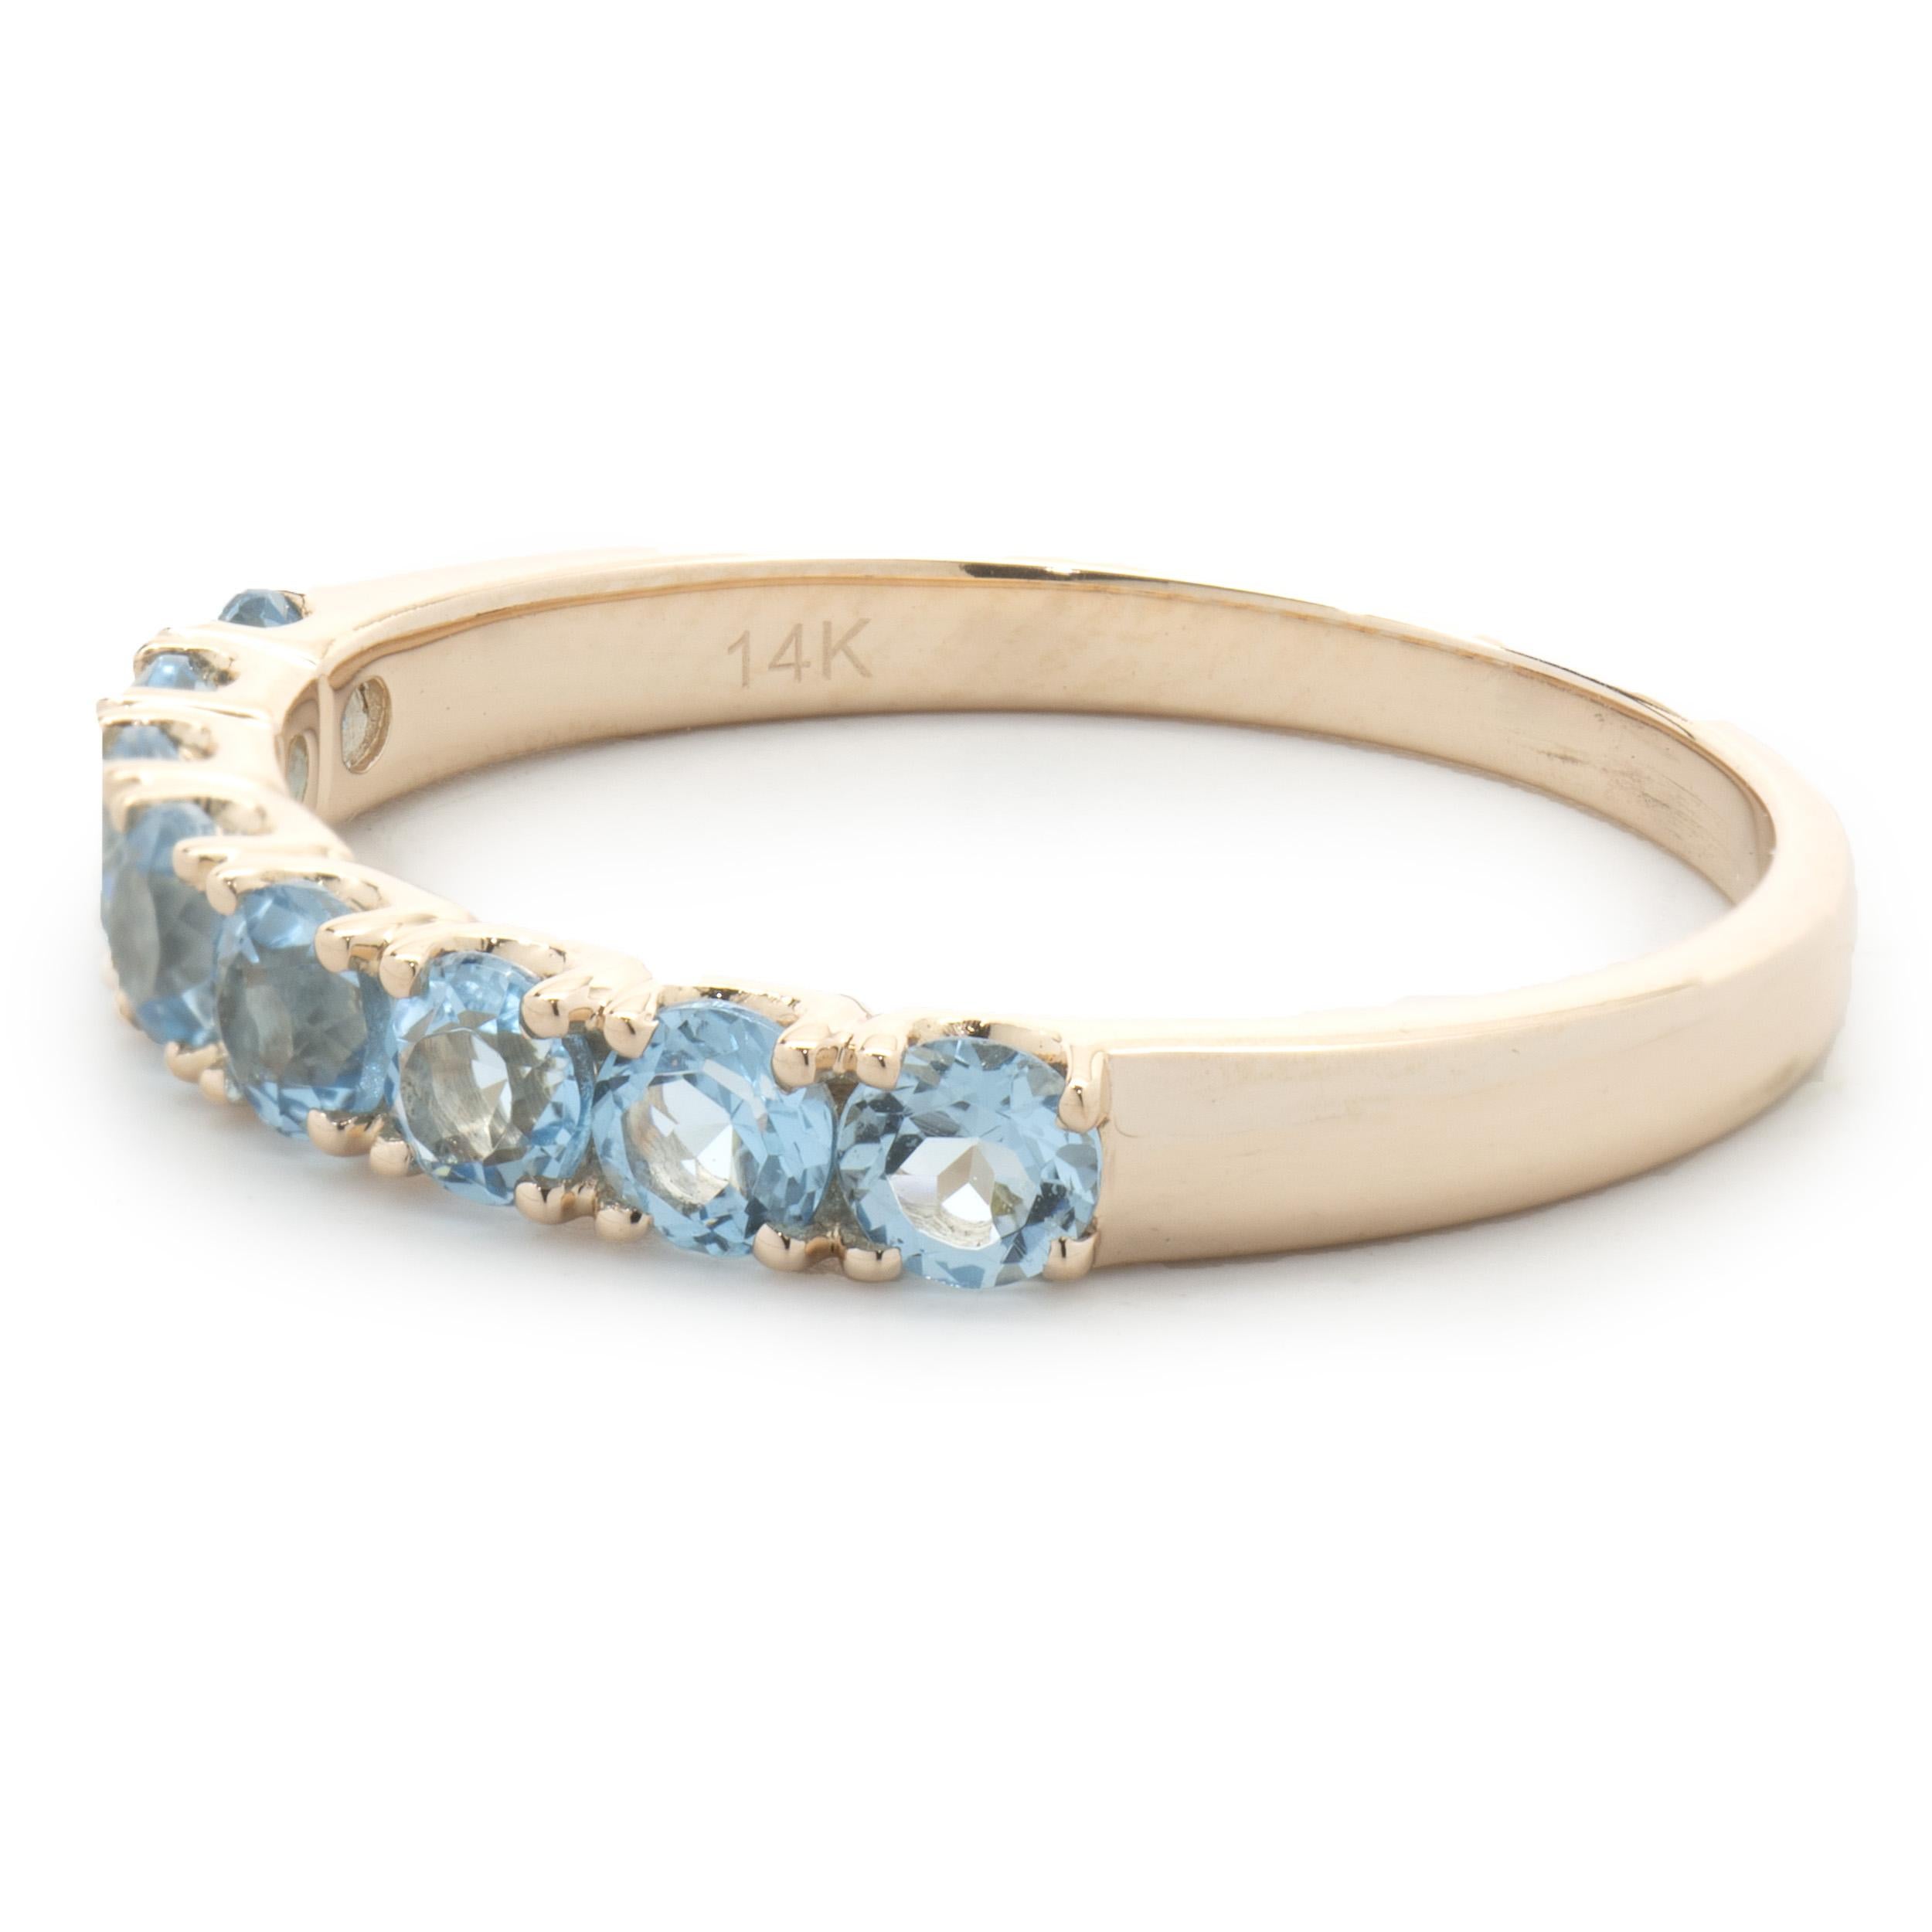 Designer: custom design
Material: 14K rose gold
Apatite: 8 round cut = 0.96cttw
Dimensions: ring top measures 3mm wide
Ring Size: 8.5 (please allow two extra shipping days for sizing requests) 
Weight: 2.40 grams
